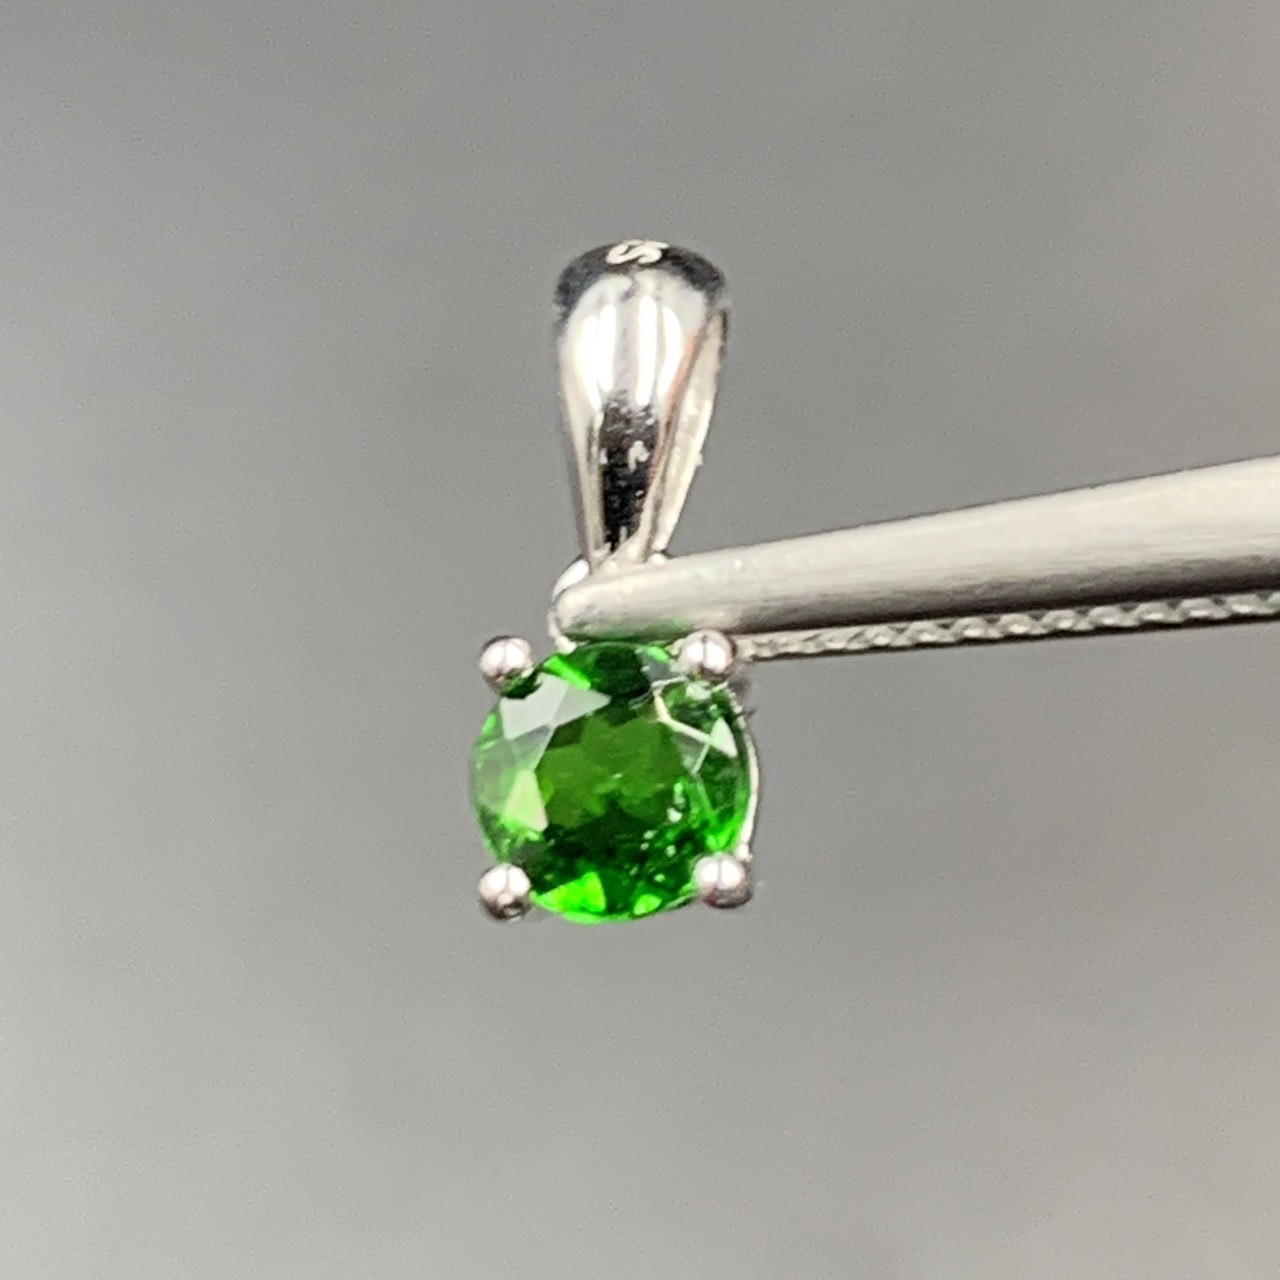 Awesome Natural Rare Chrome Diopside With Silver Pendant - Image 3 of 4